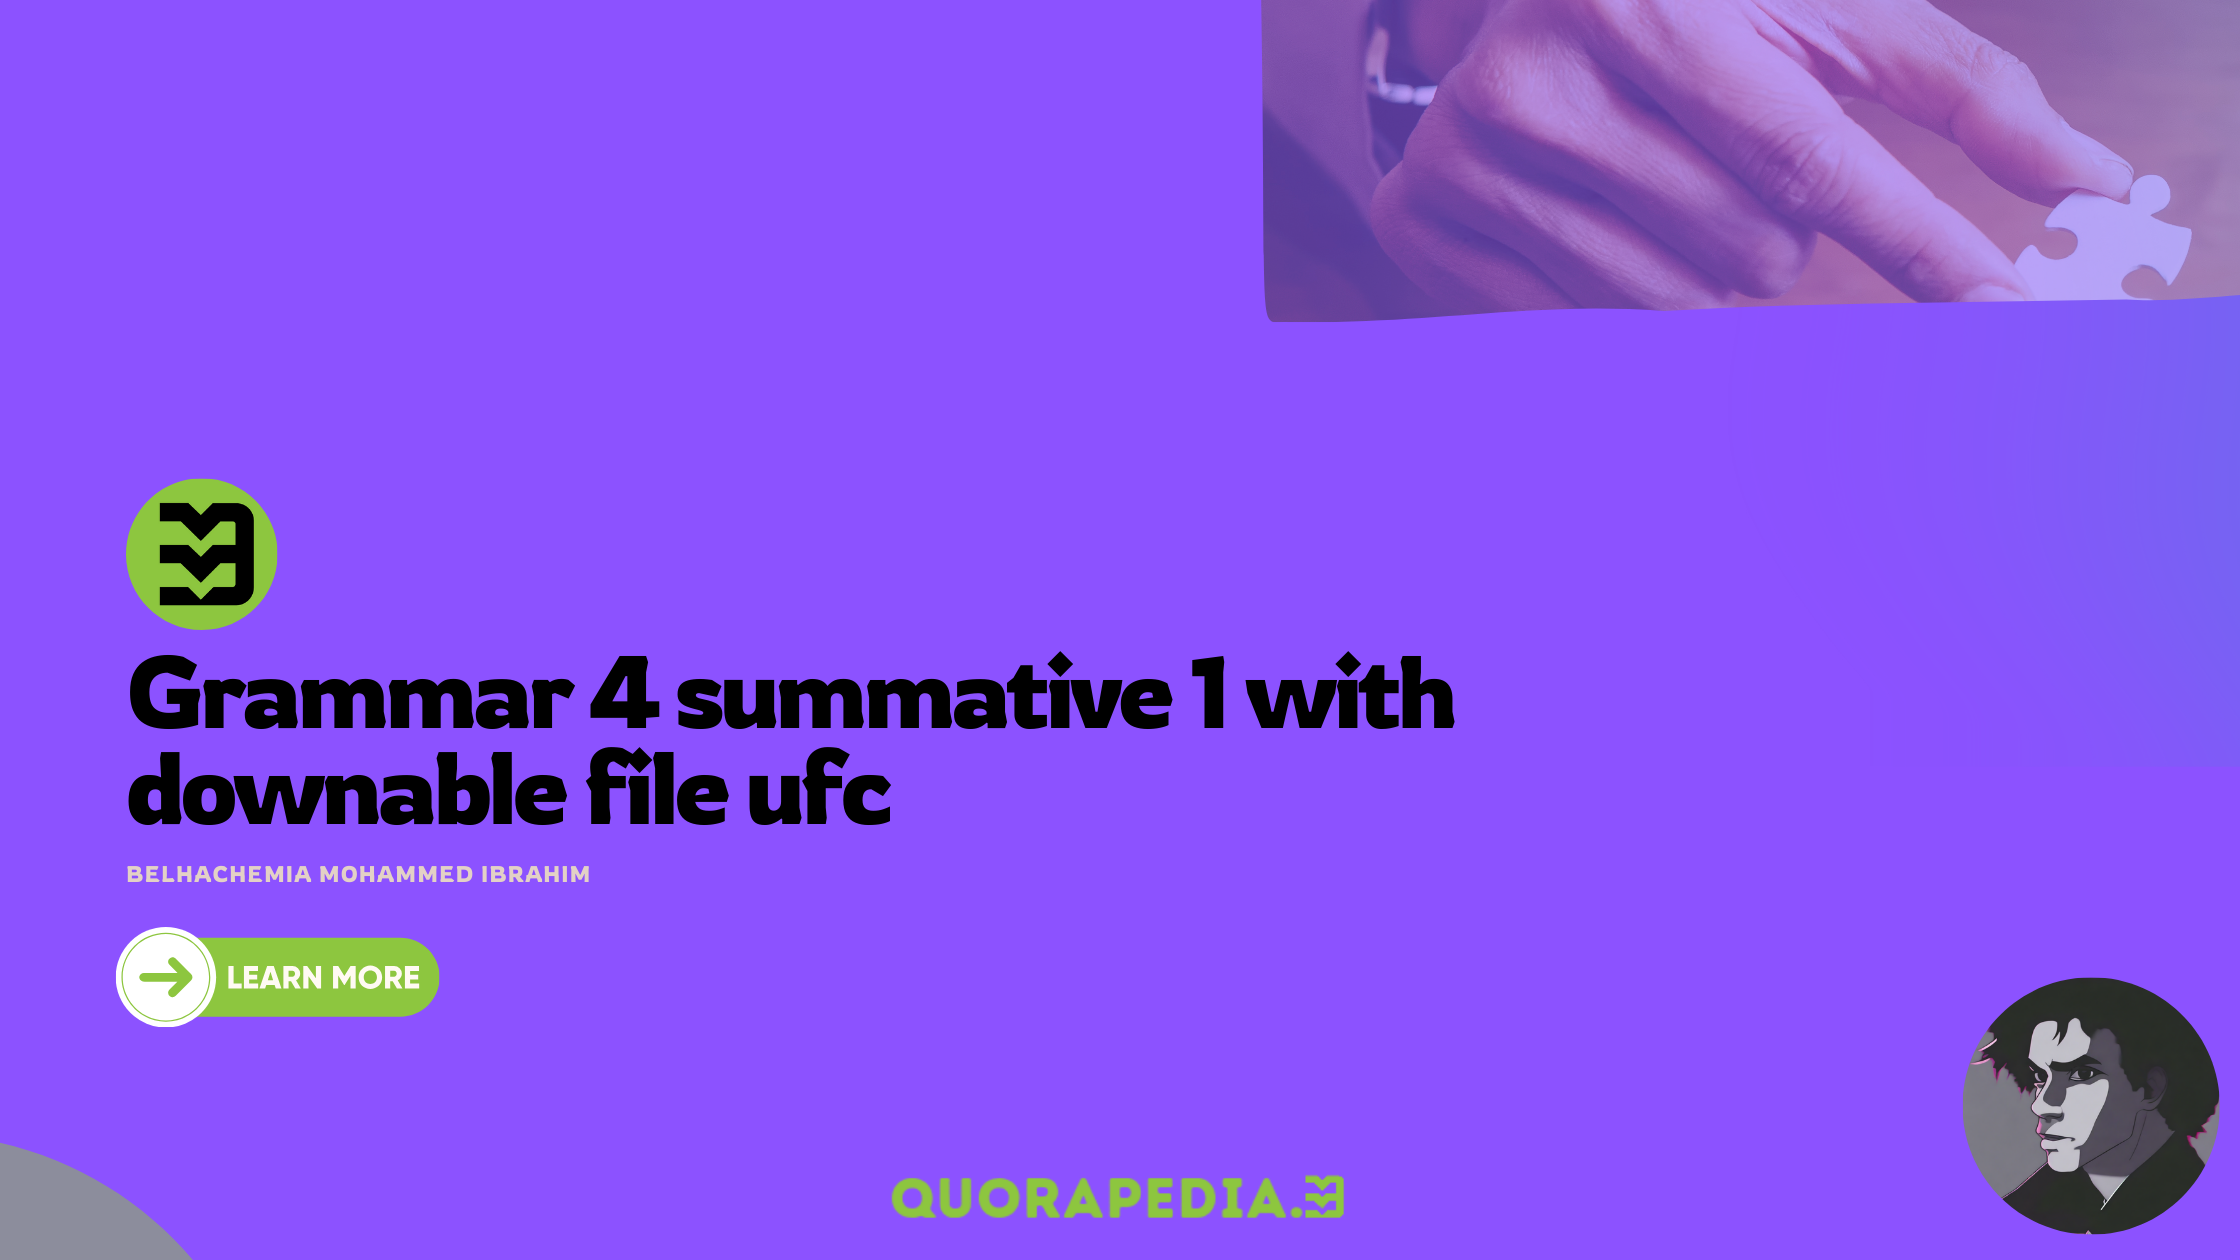 Grammar 4 summative 1 with downable file ufc